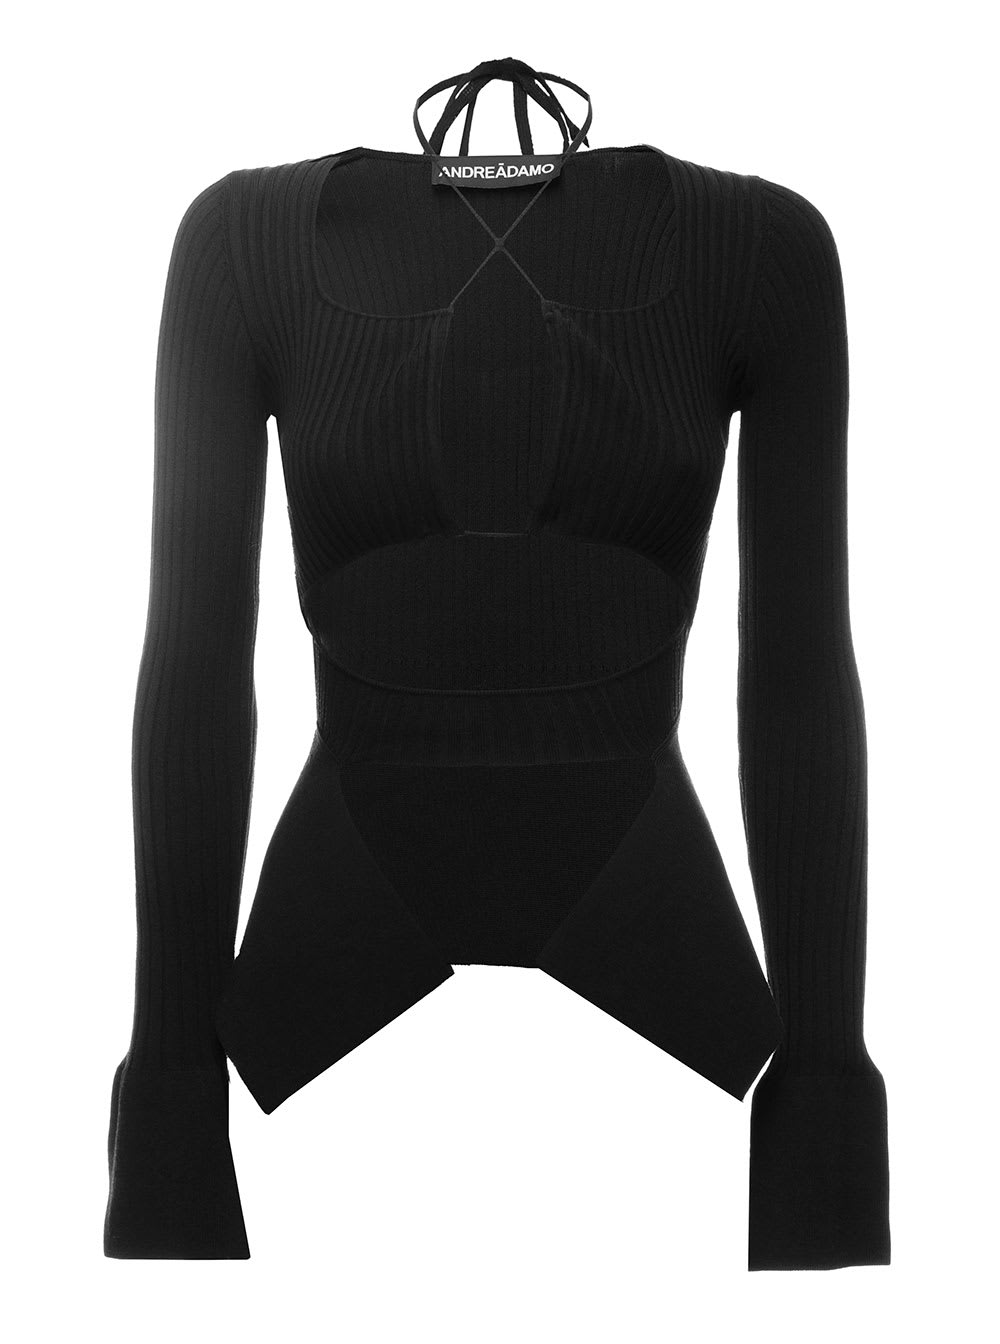 ANDREADAMO Ribbed Knit Cut-out Top With Panels